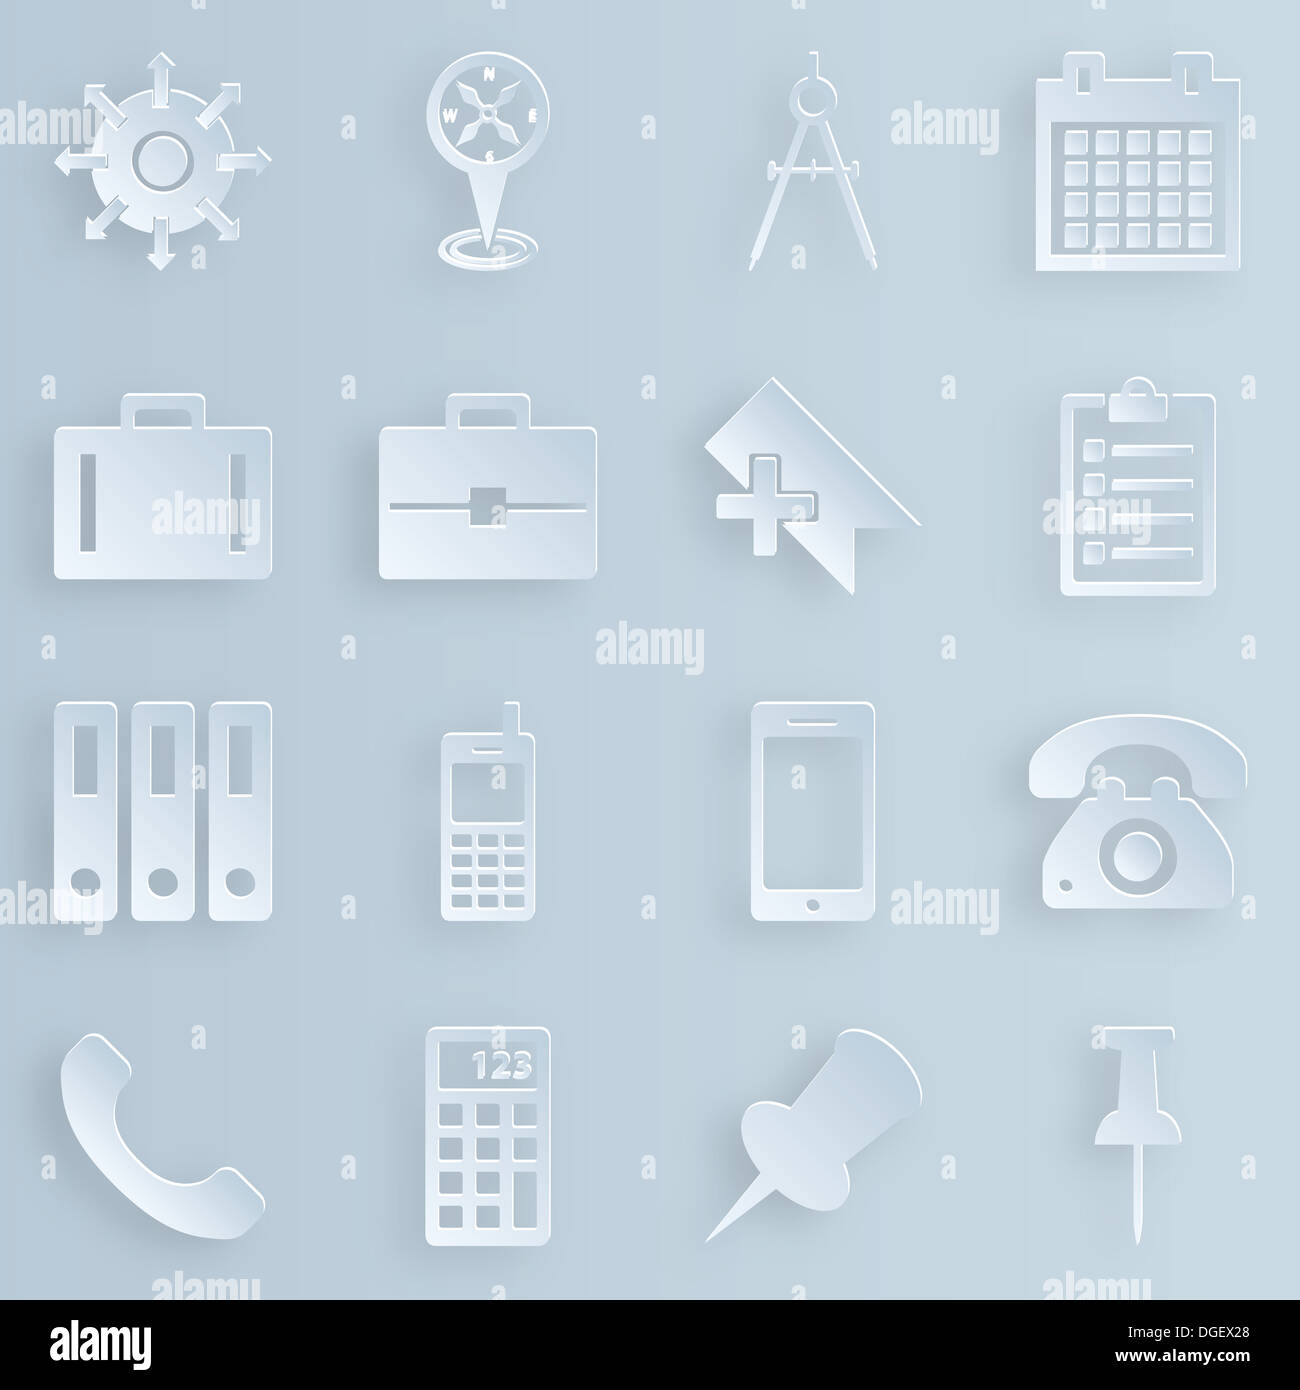 Business, technology, e-commerce, web and shopping icons set paper style Stock Photo